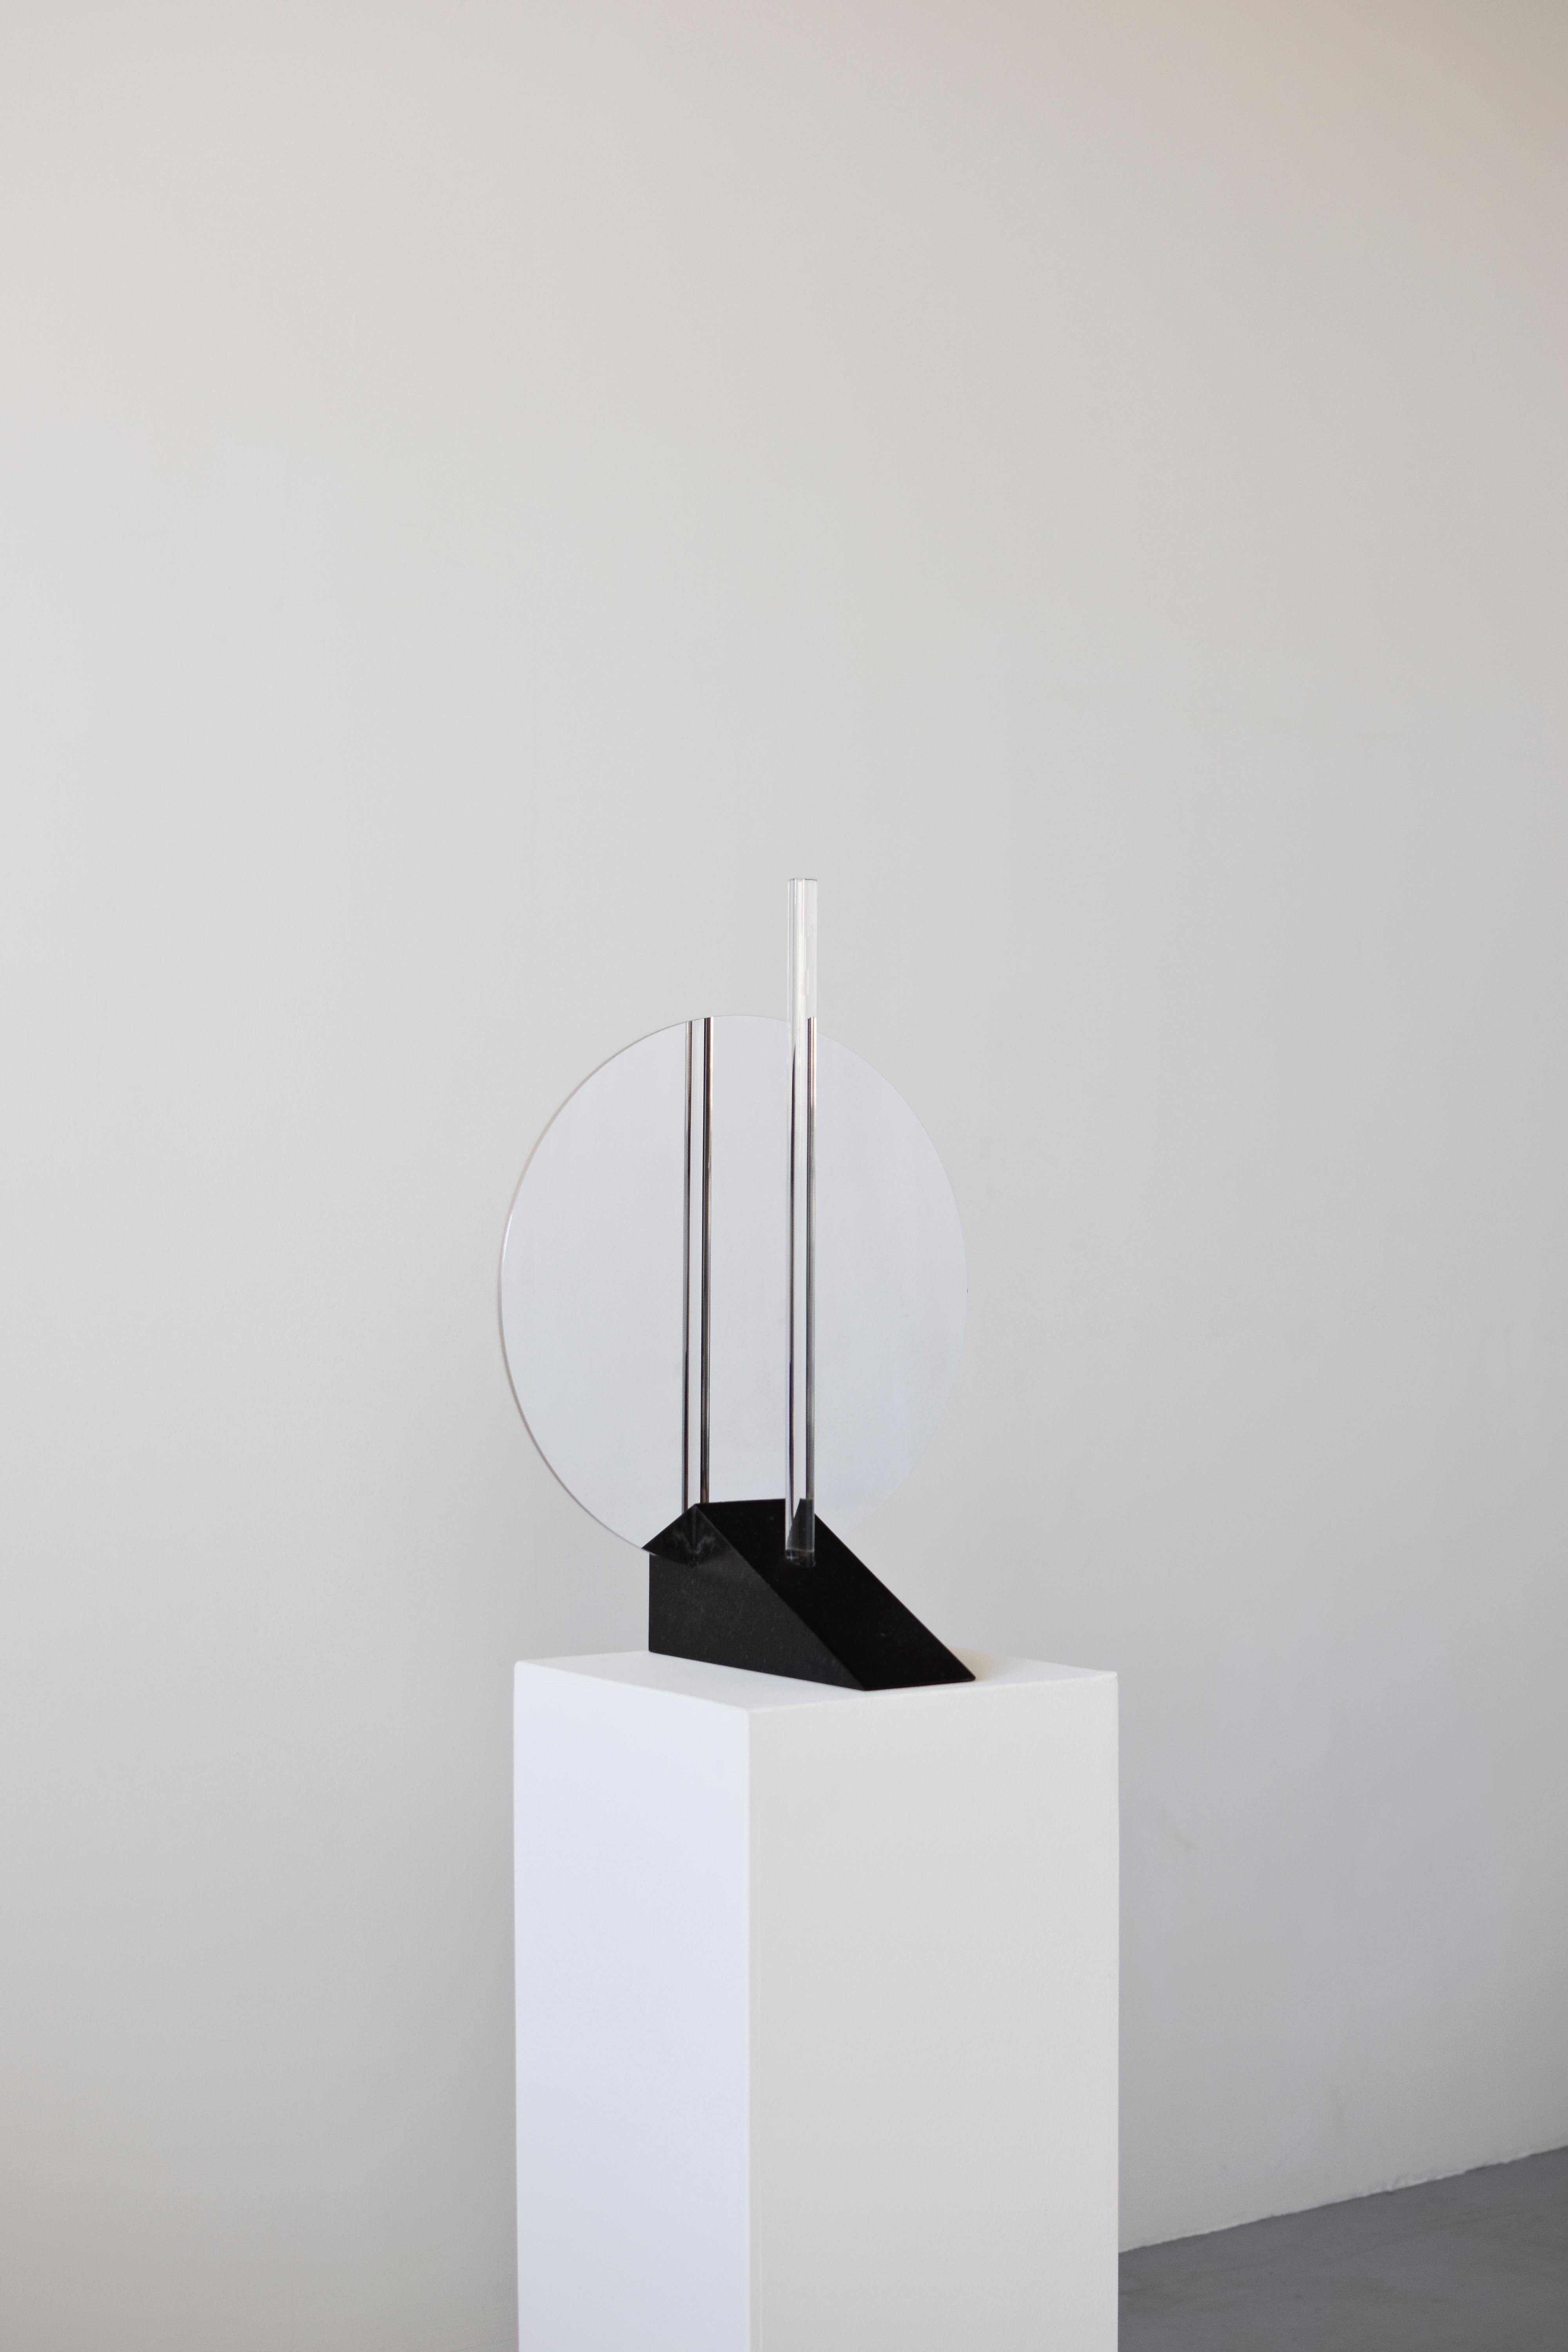 Sculptural table lamp - Maximilian Michaelis

Title: The elusive nature of perception, No. 02

Measures: ca. 39 x 55 x 27 cm

Material: polished stainless steel, Belgian bluestone, acrylic glass, Led

The basis and inspiration for Maximilian